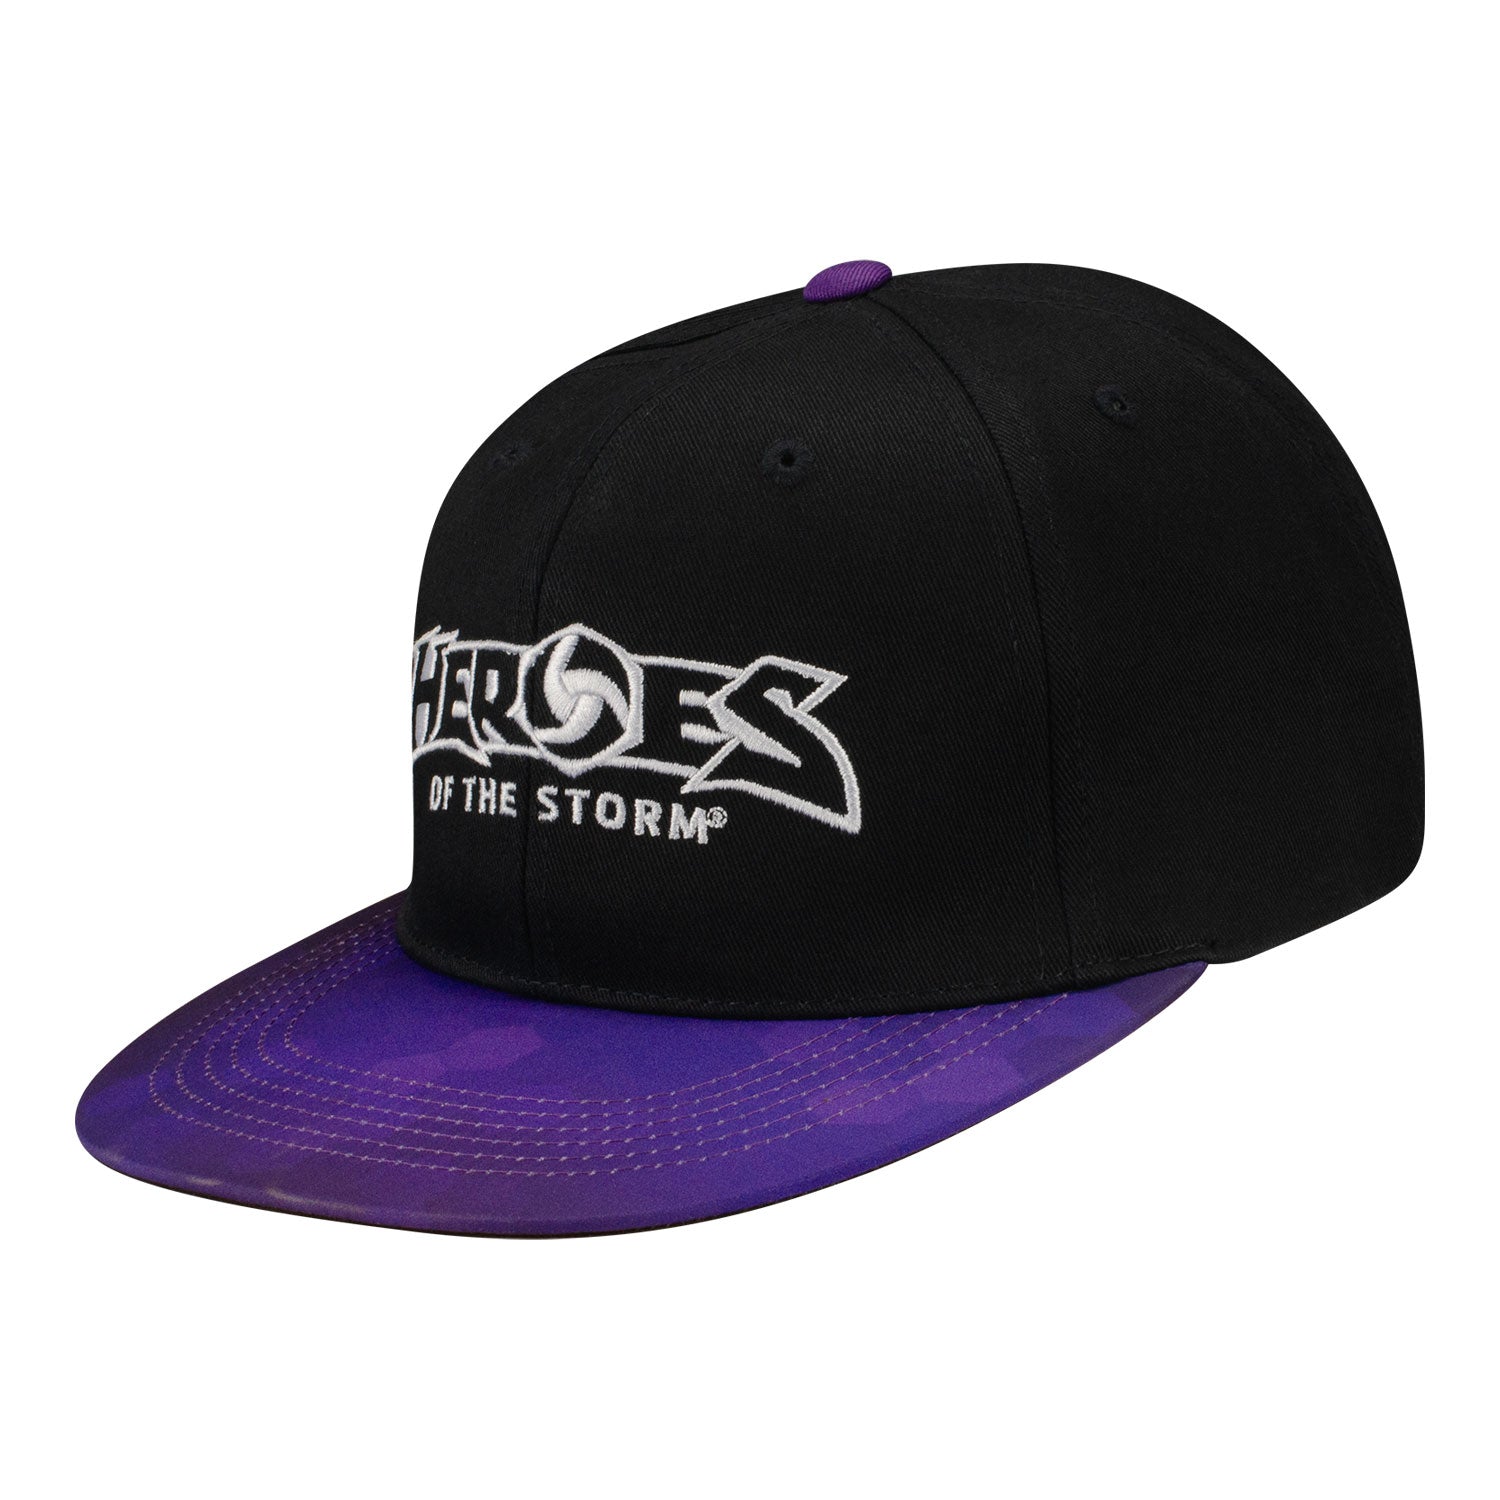 Heroes of the Storm Black Snapback Hat - Left View